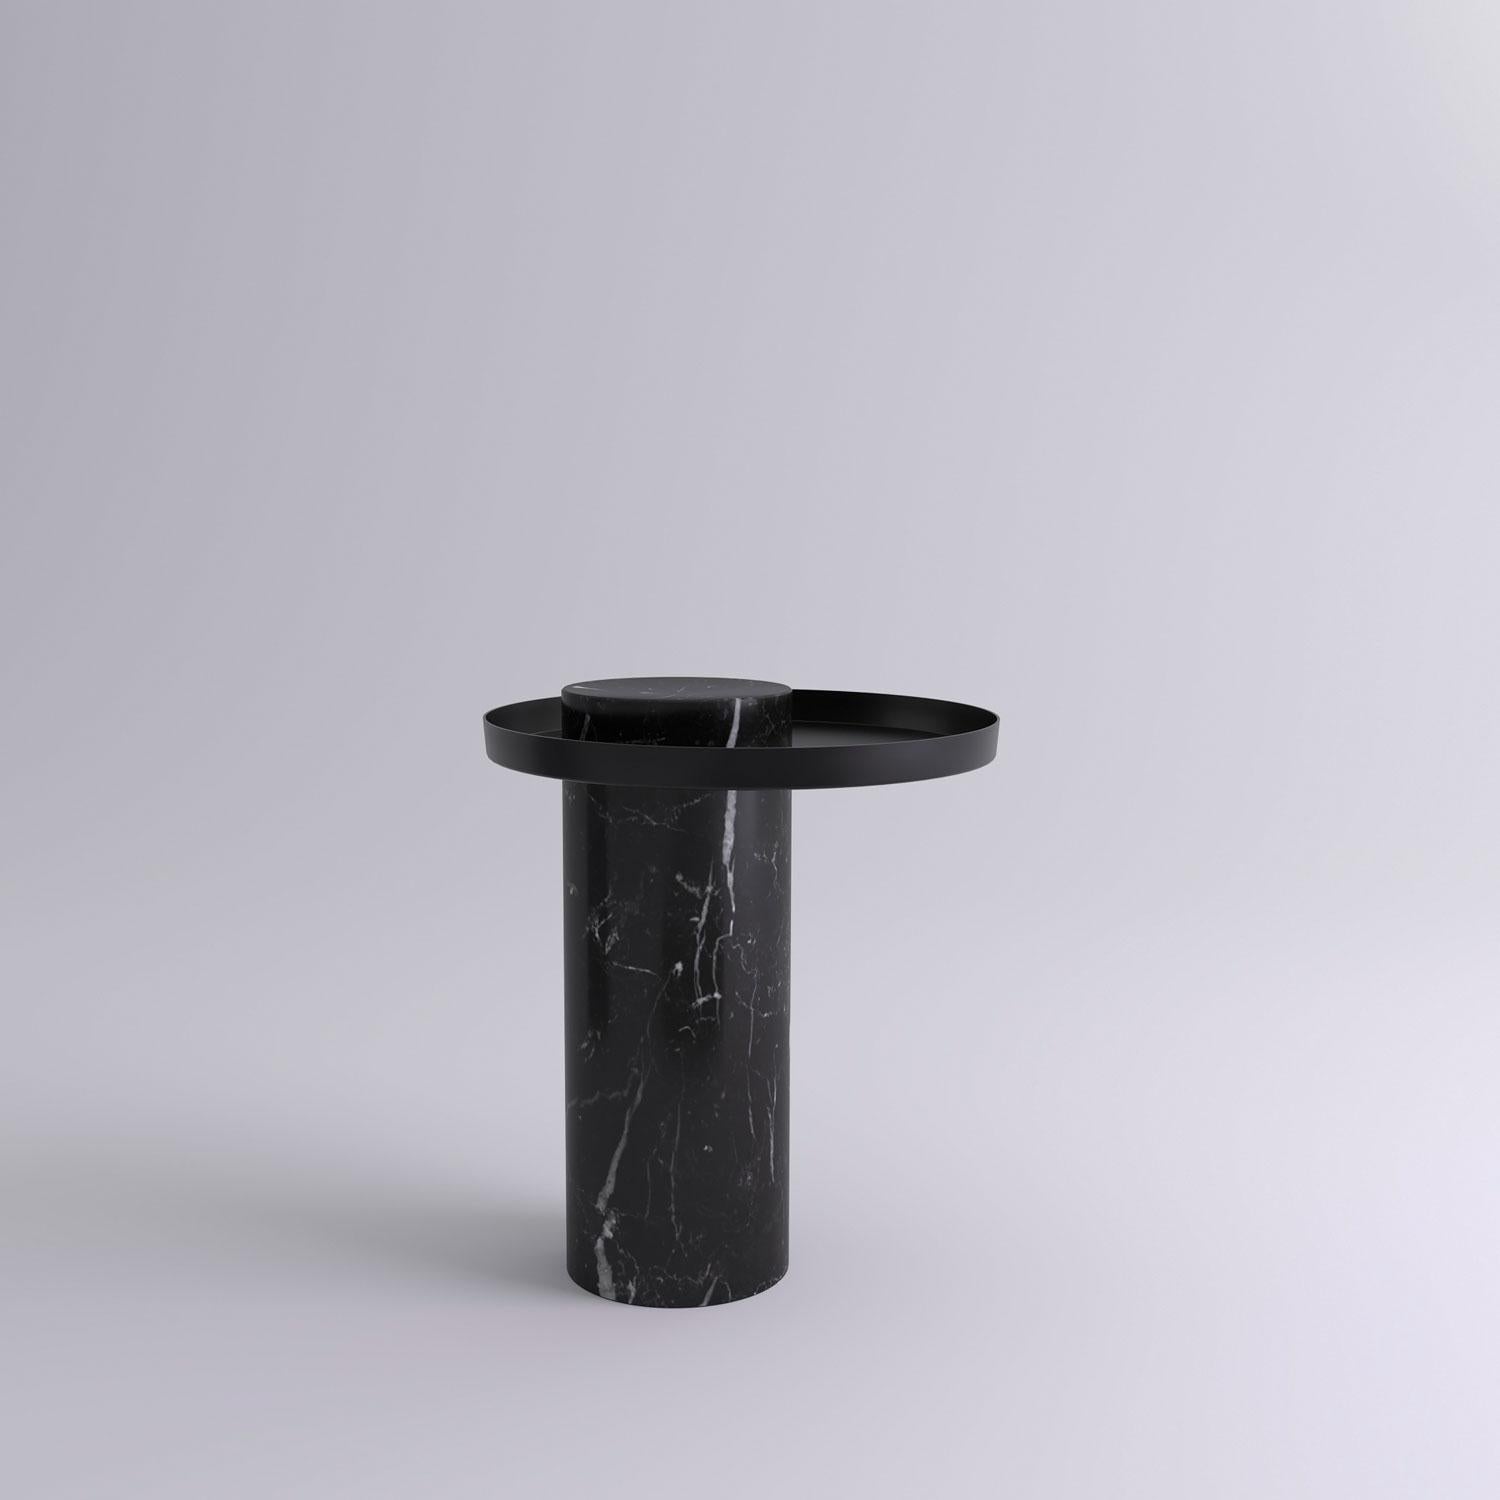 Medium black marquina contemporary guéridon, Sebastian Herkner
Dimensions: D 40 x H 46 cm
Materials: Black Marquina marble, black metal tray

The salute table exists in 3 sizes, 4 different marble stones for the column and 5 different finishes